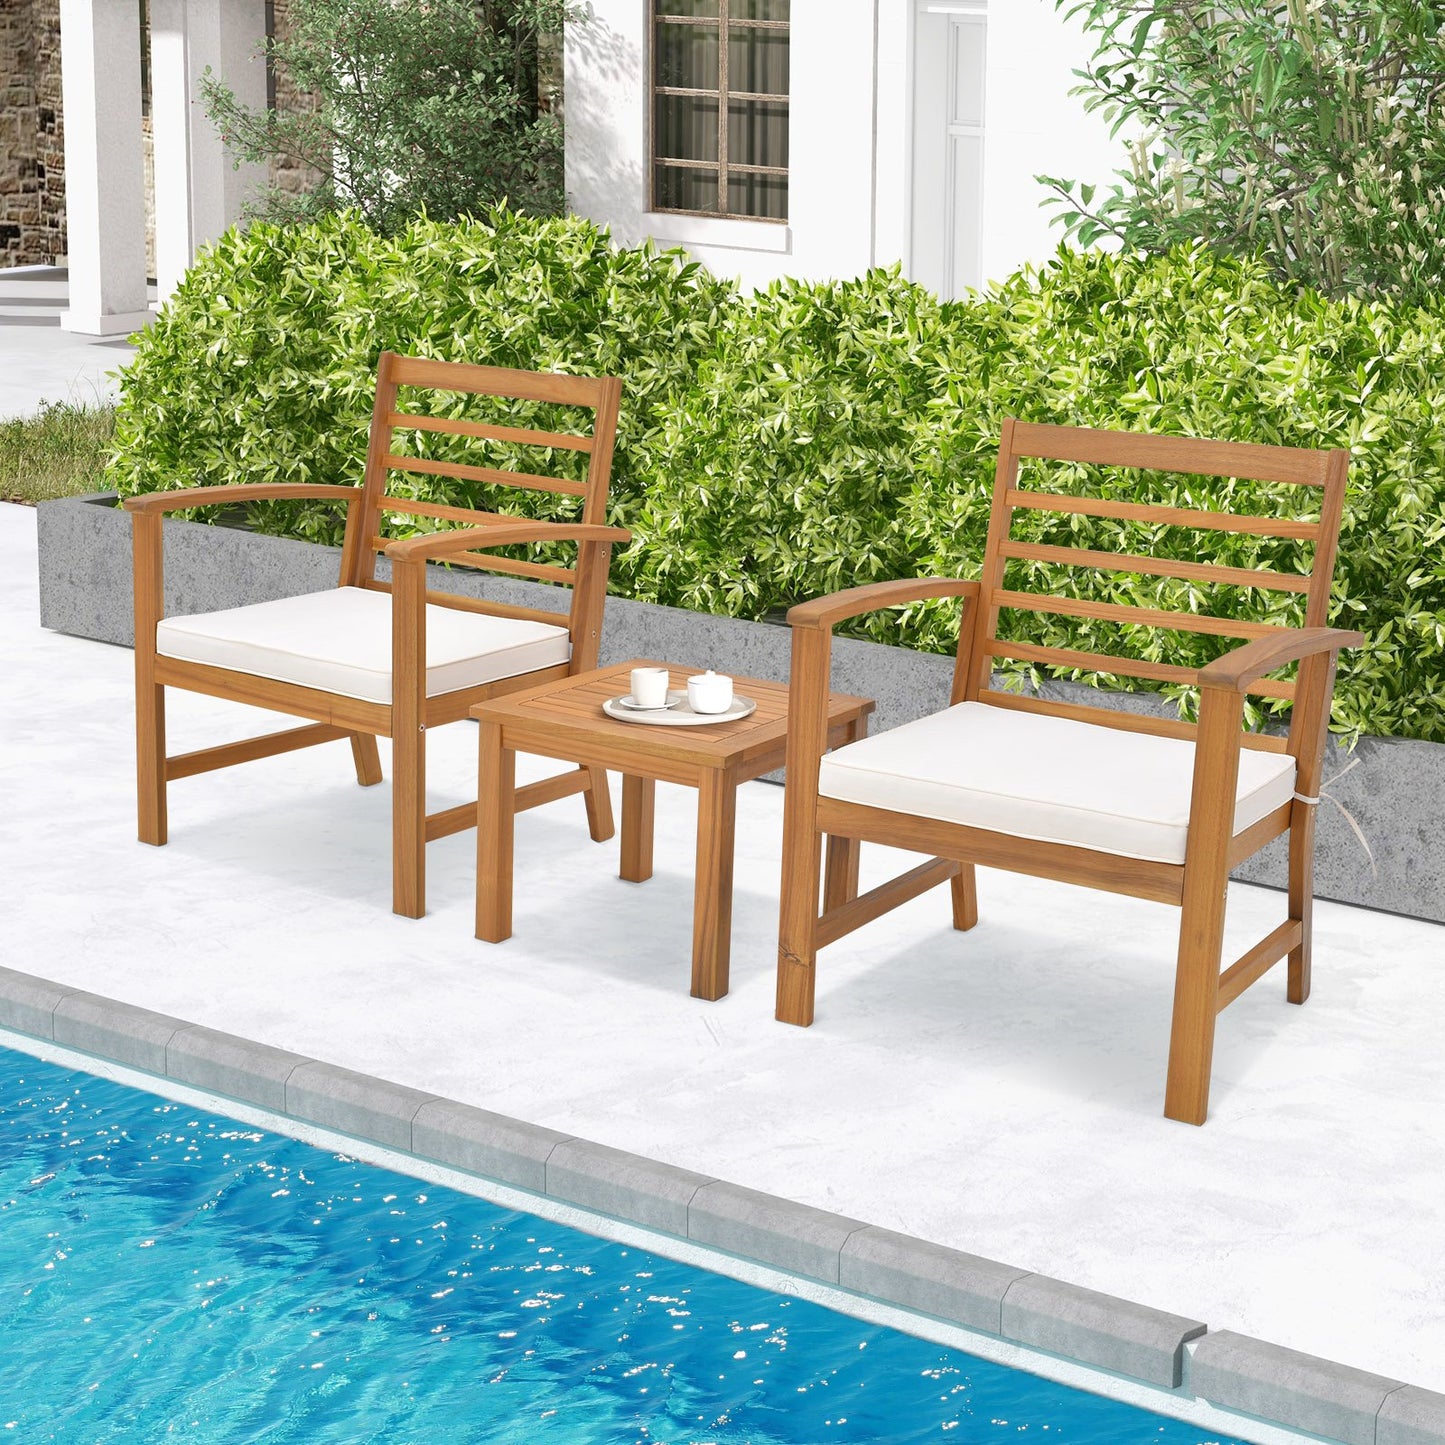 3 Pieces Outdoor Furniture Set with Soft Seat Cushions, White